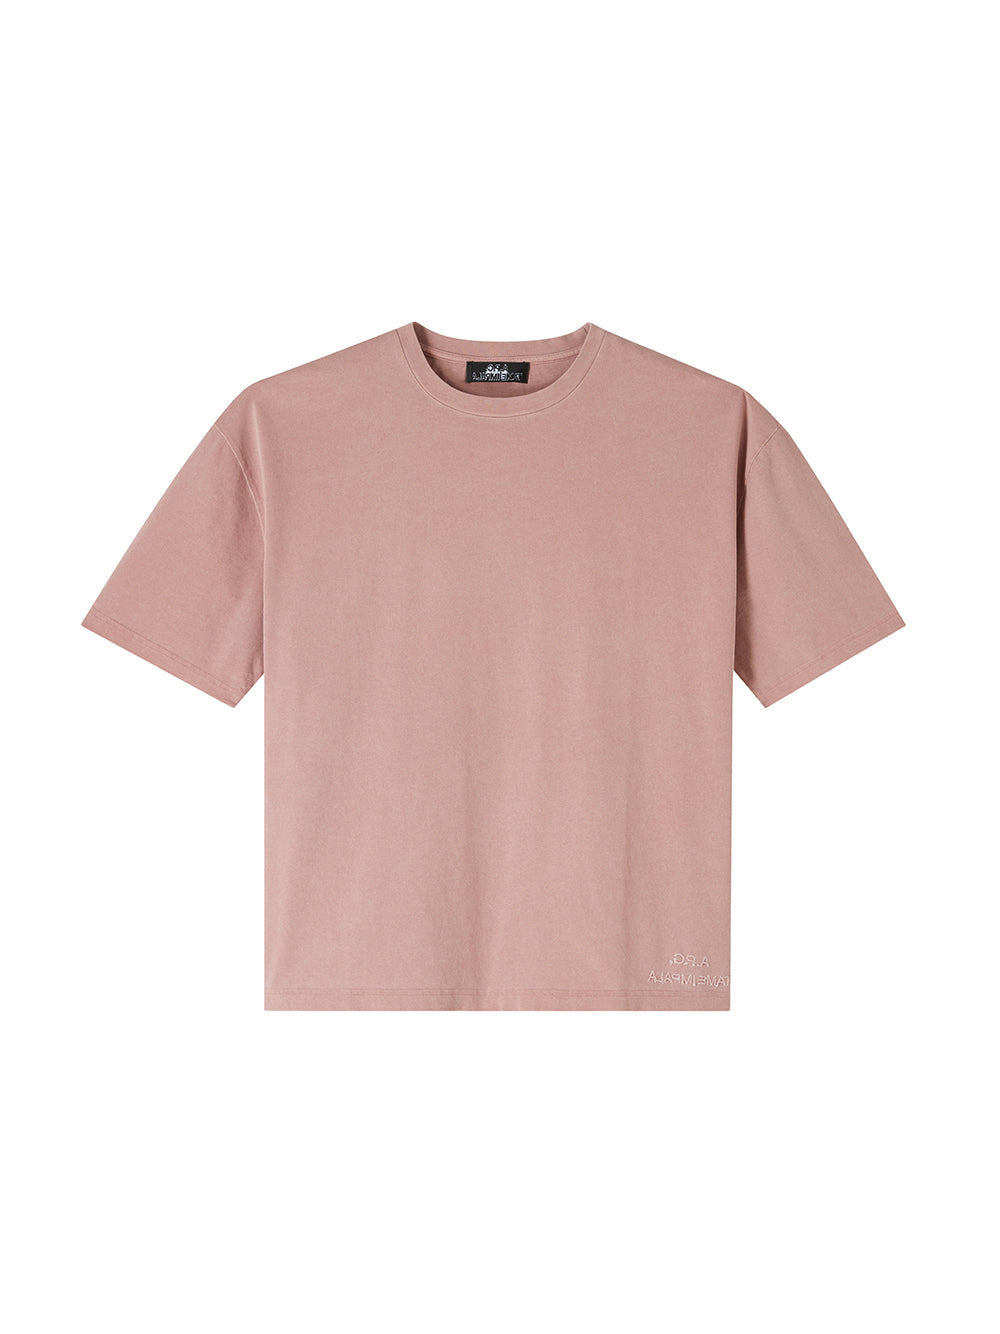 A.P.C. x Tame Impala Floater T-Shirt